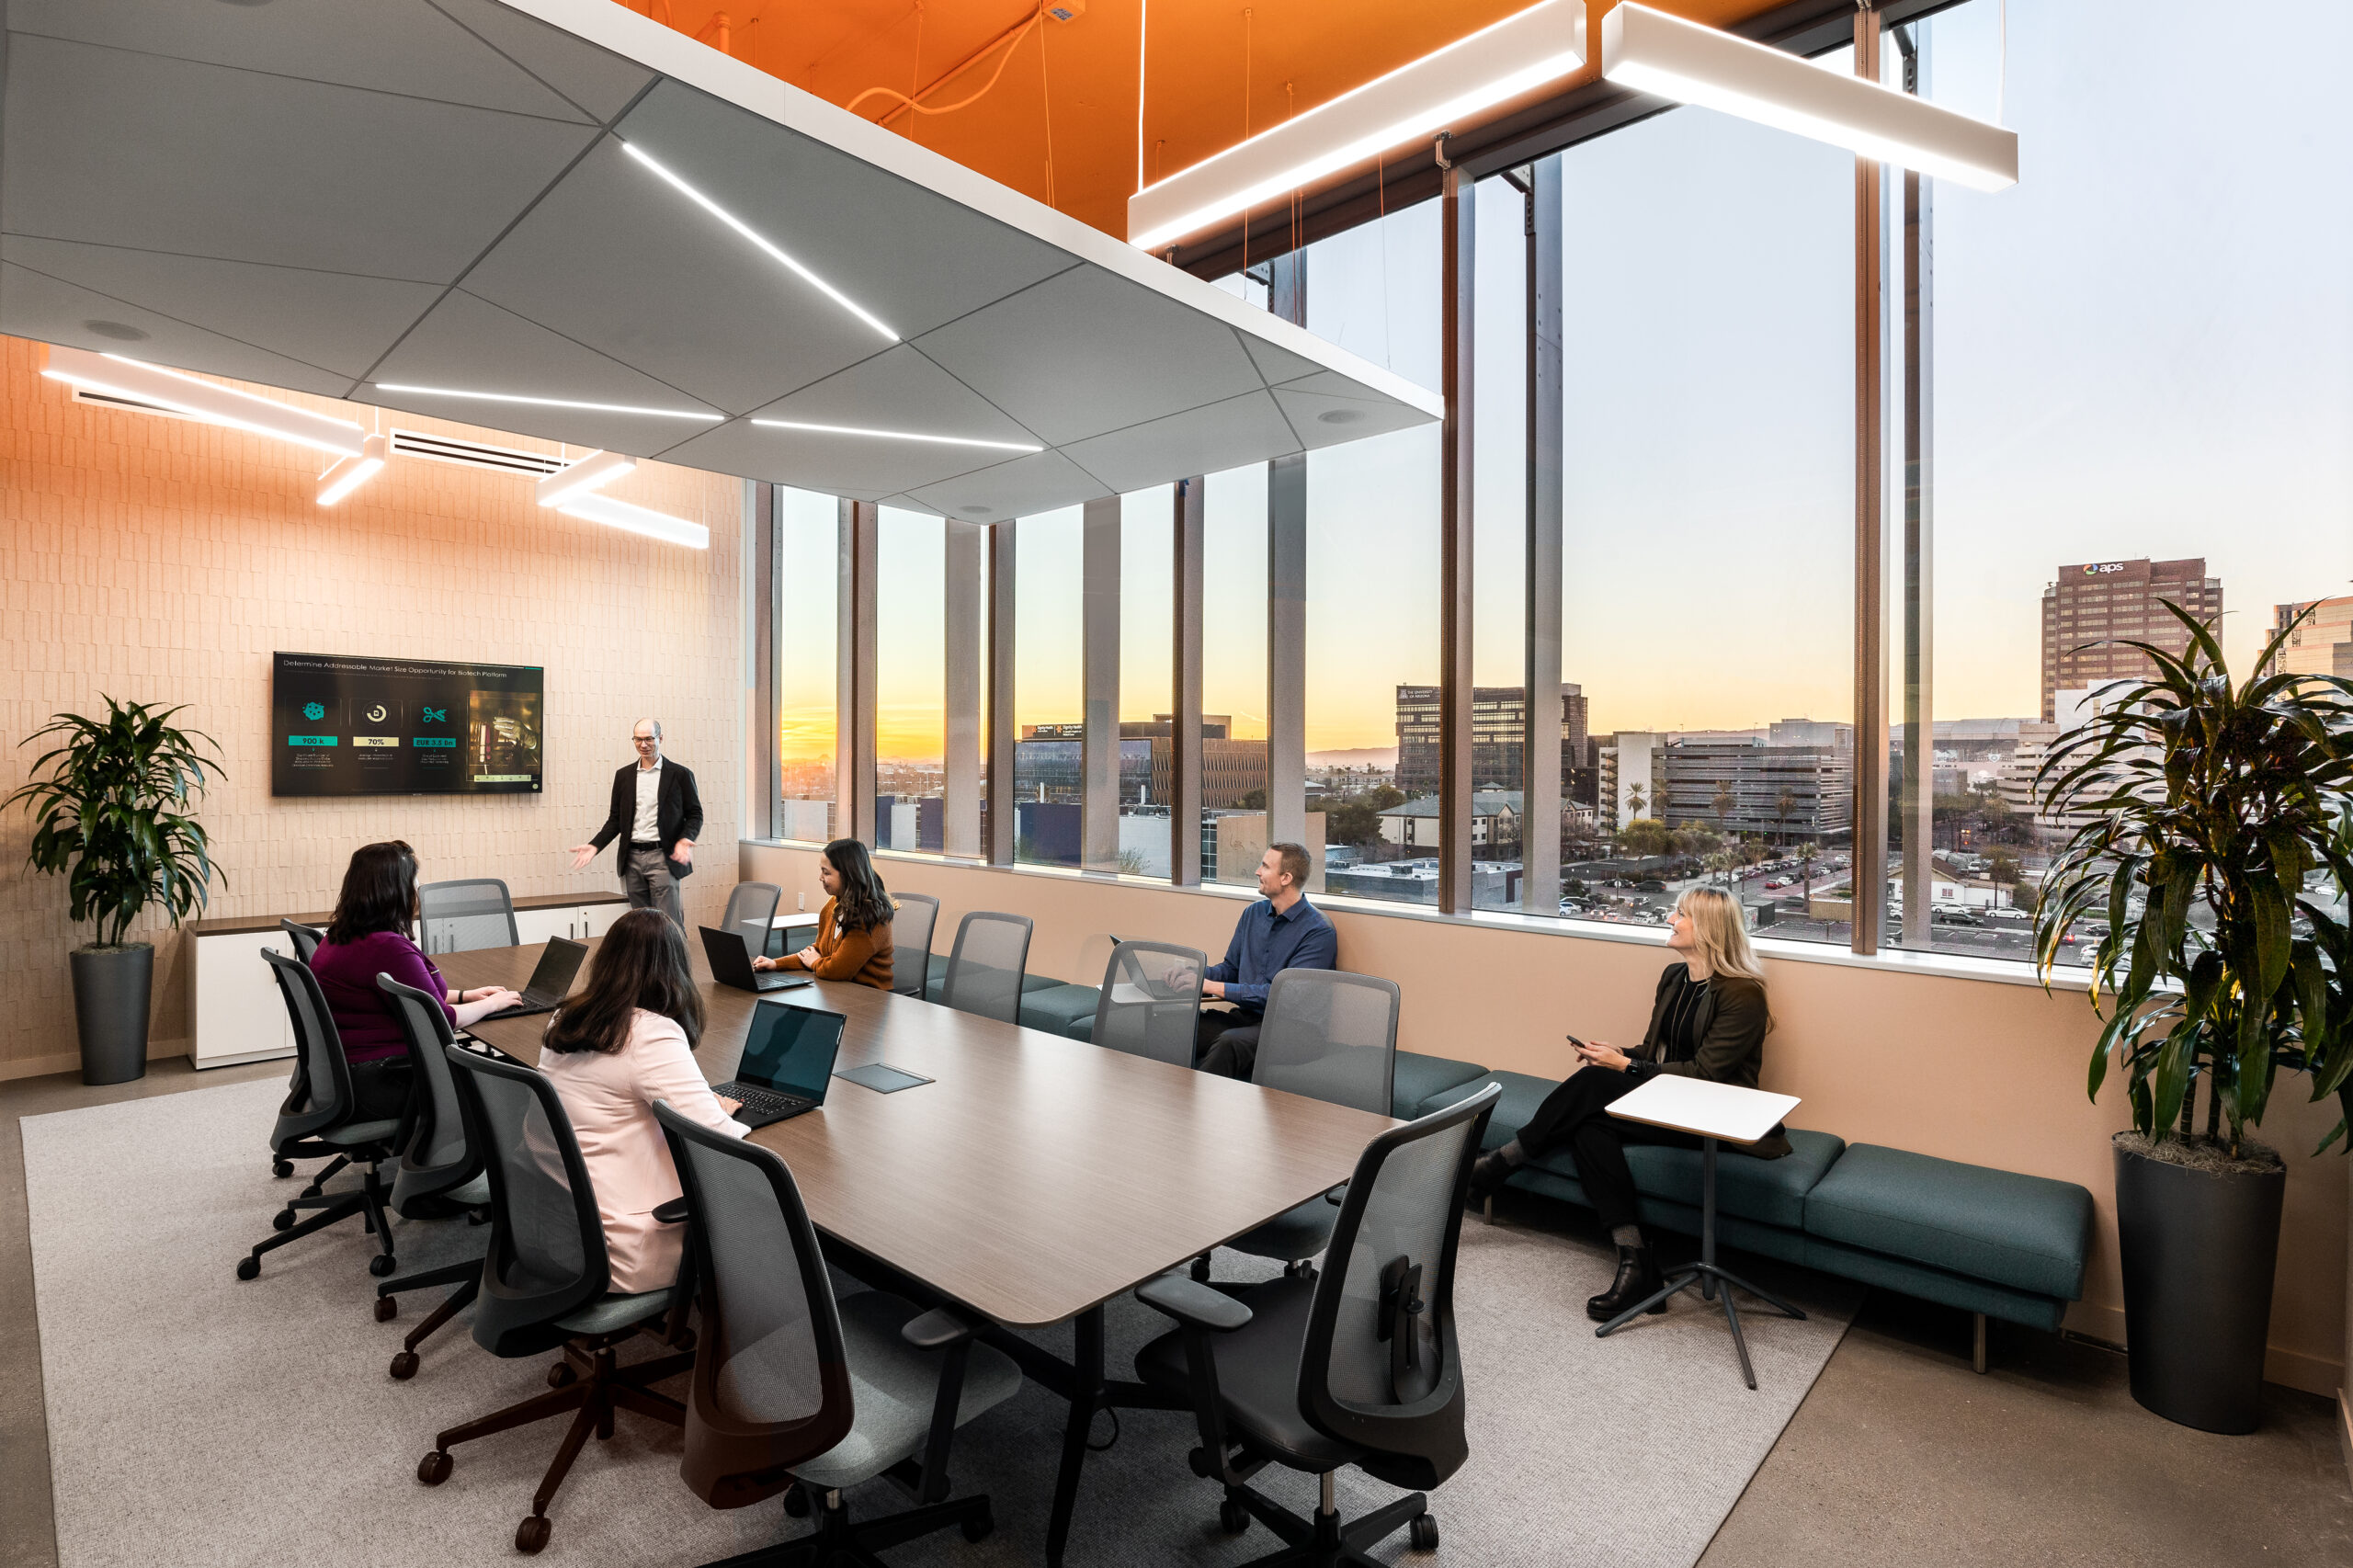 Wexford Science & Technology launches Connect Labs, a new life science coworking space on the Phoenix Bioscience Core